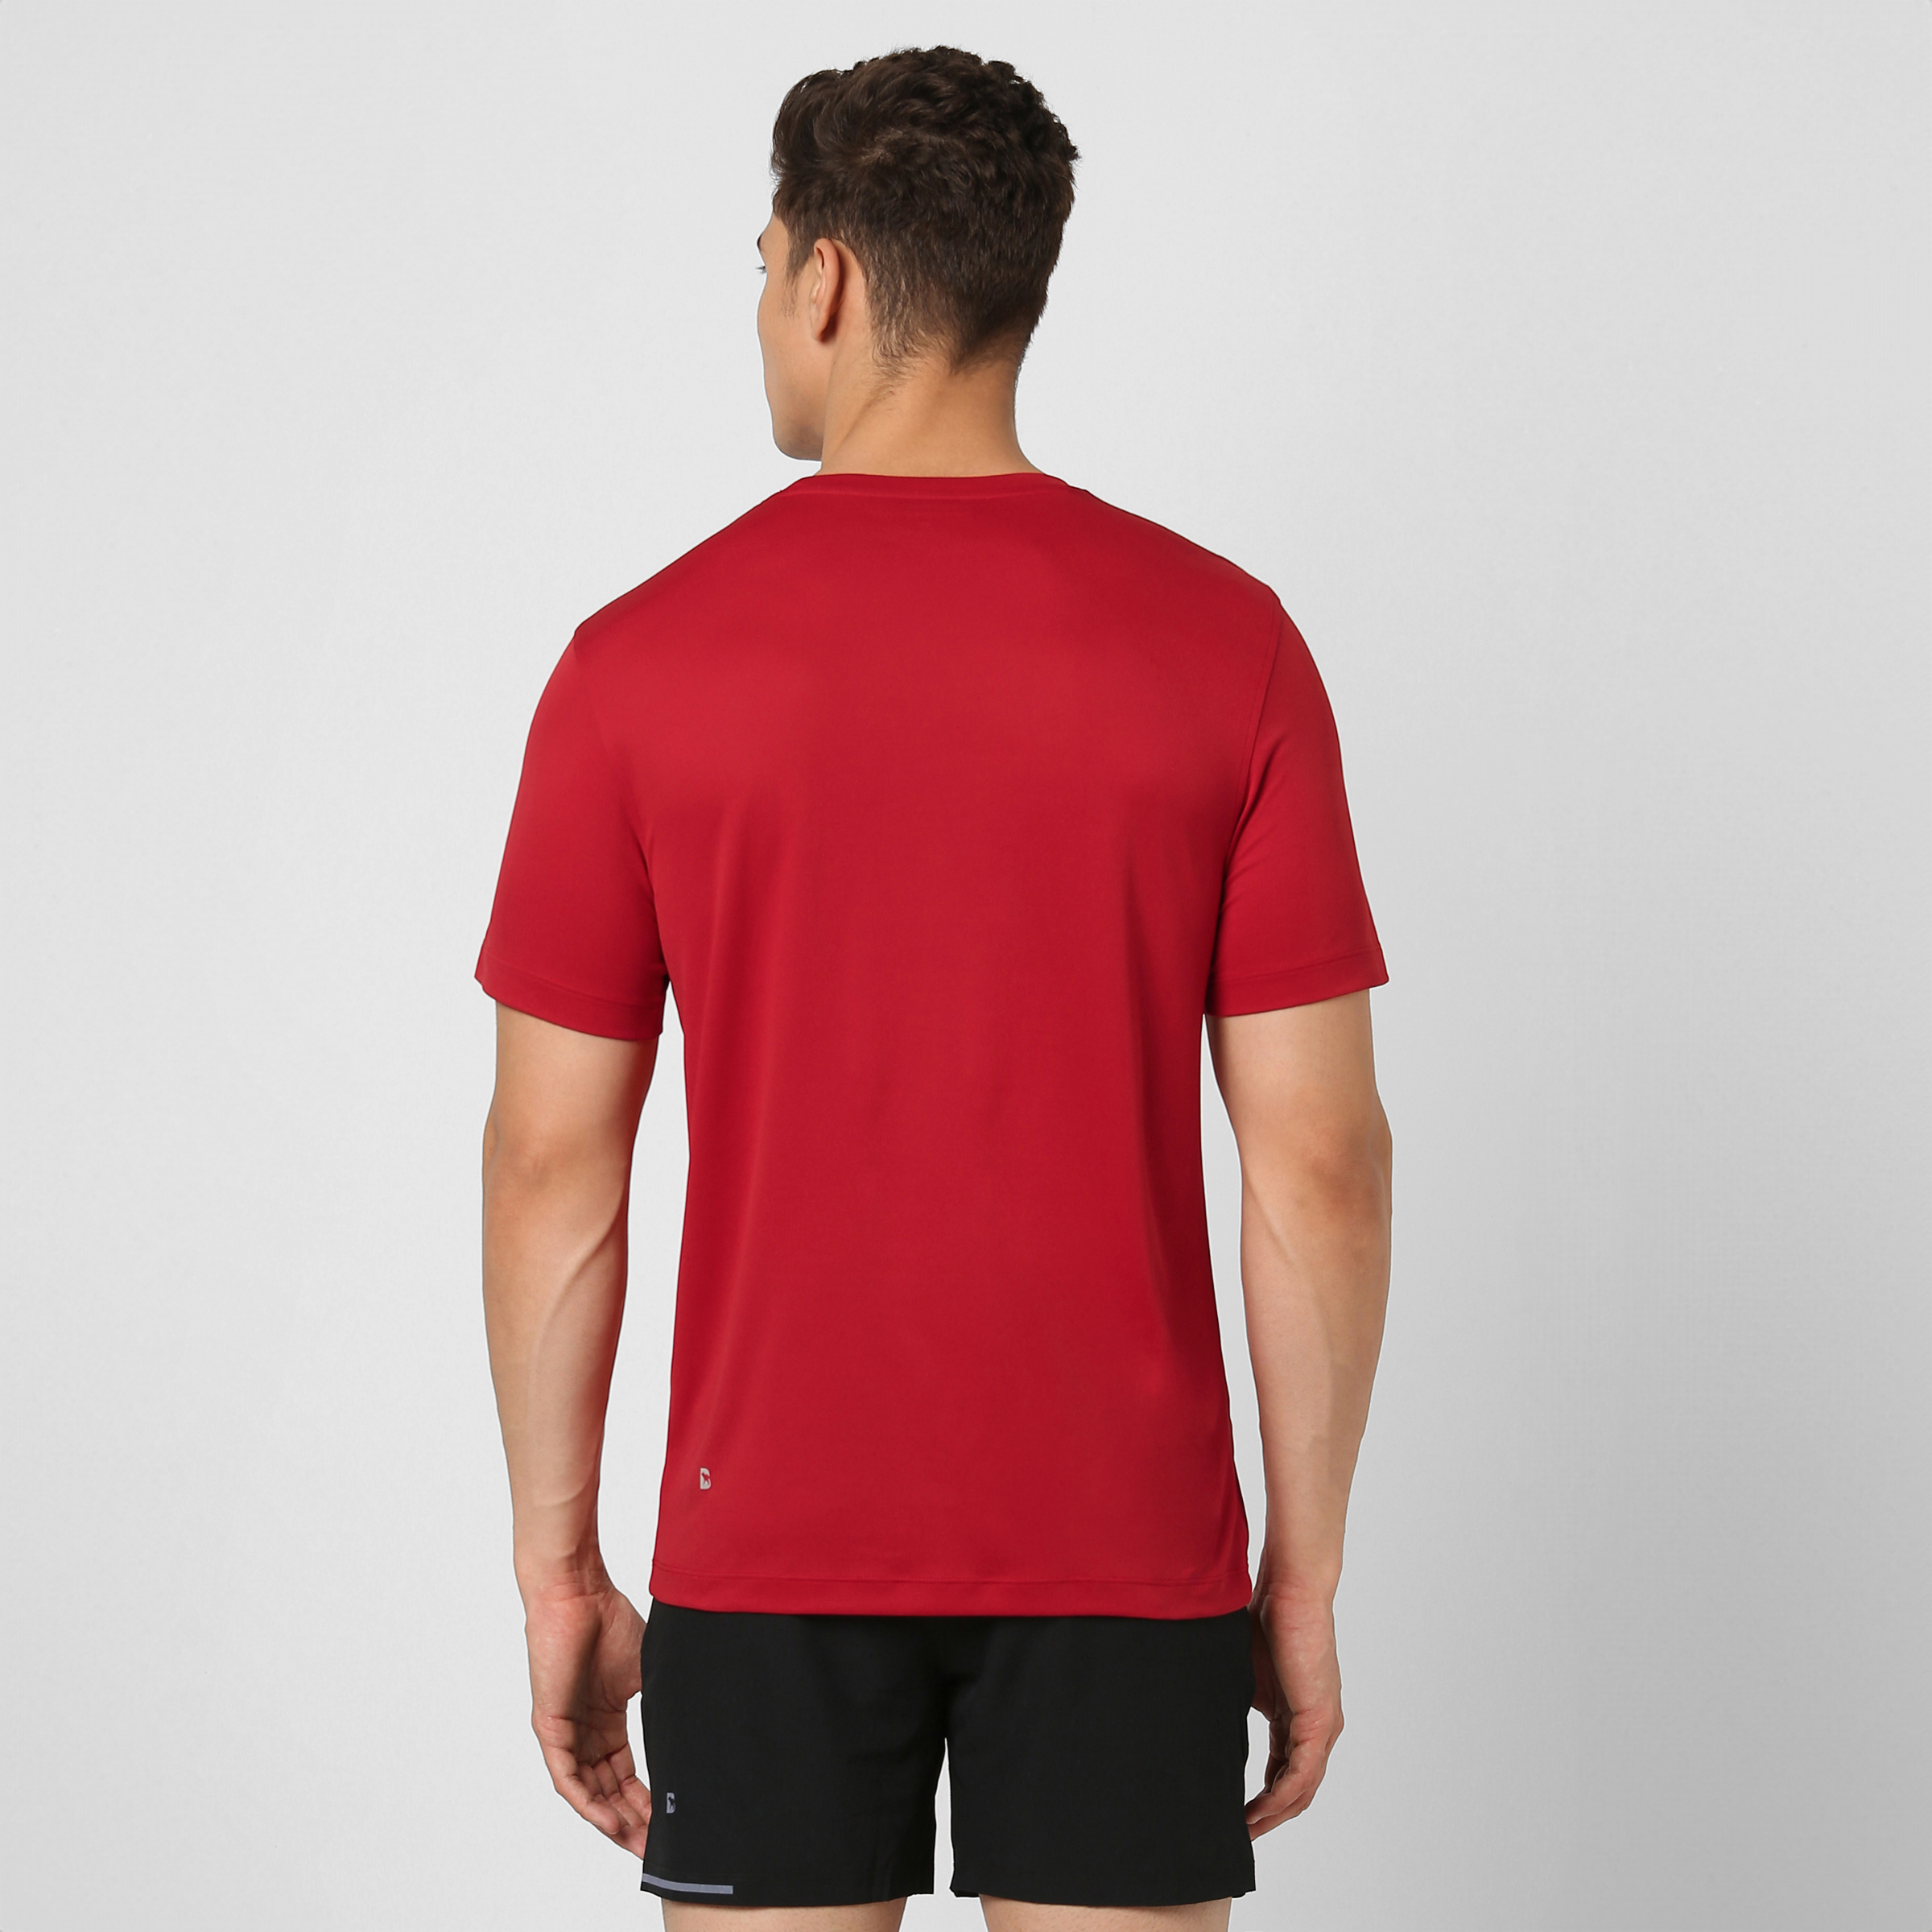 Circuit Tee Red back on model